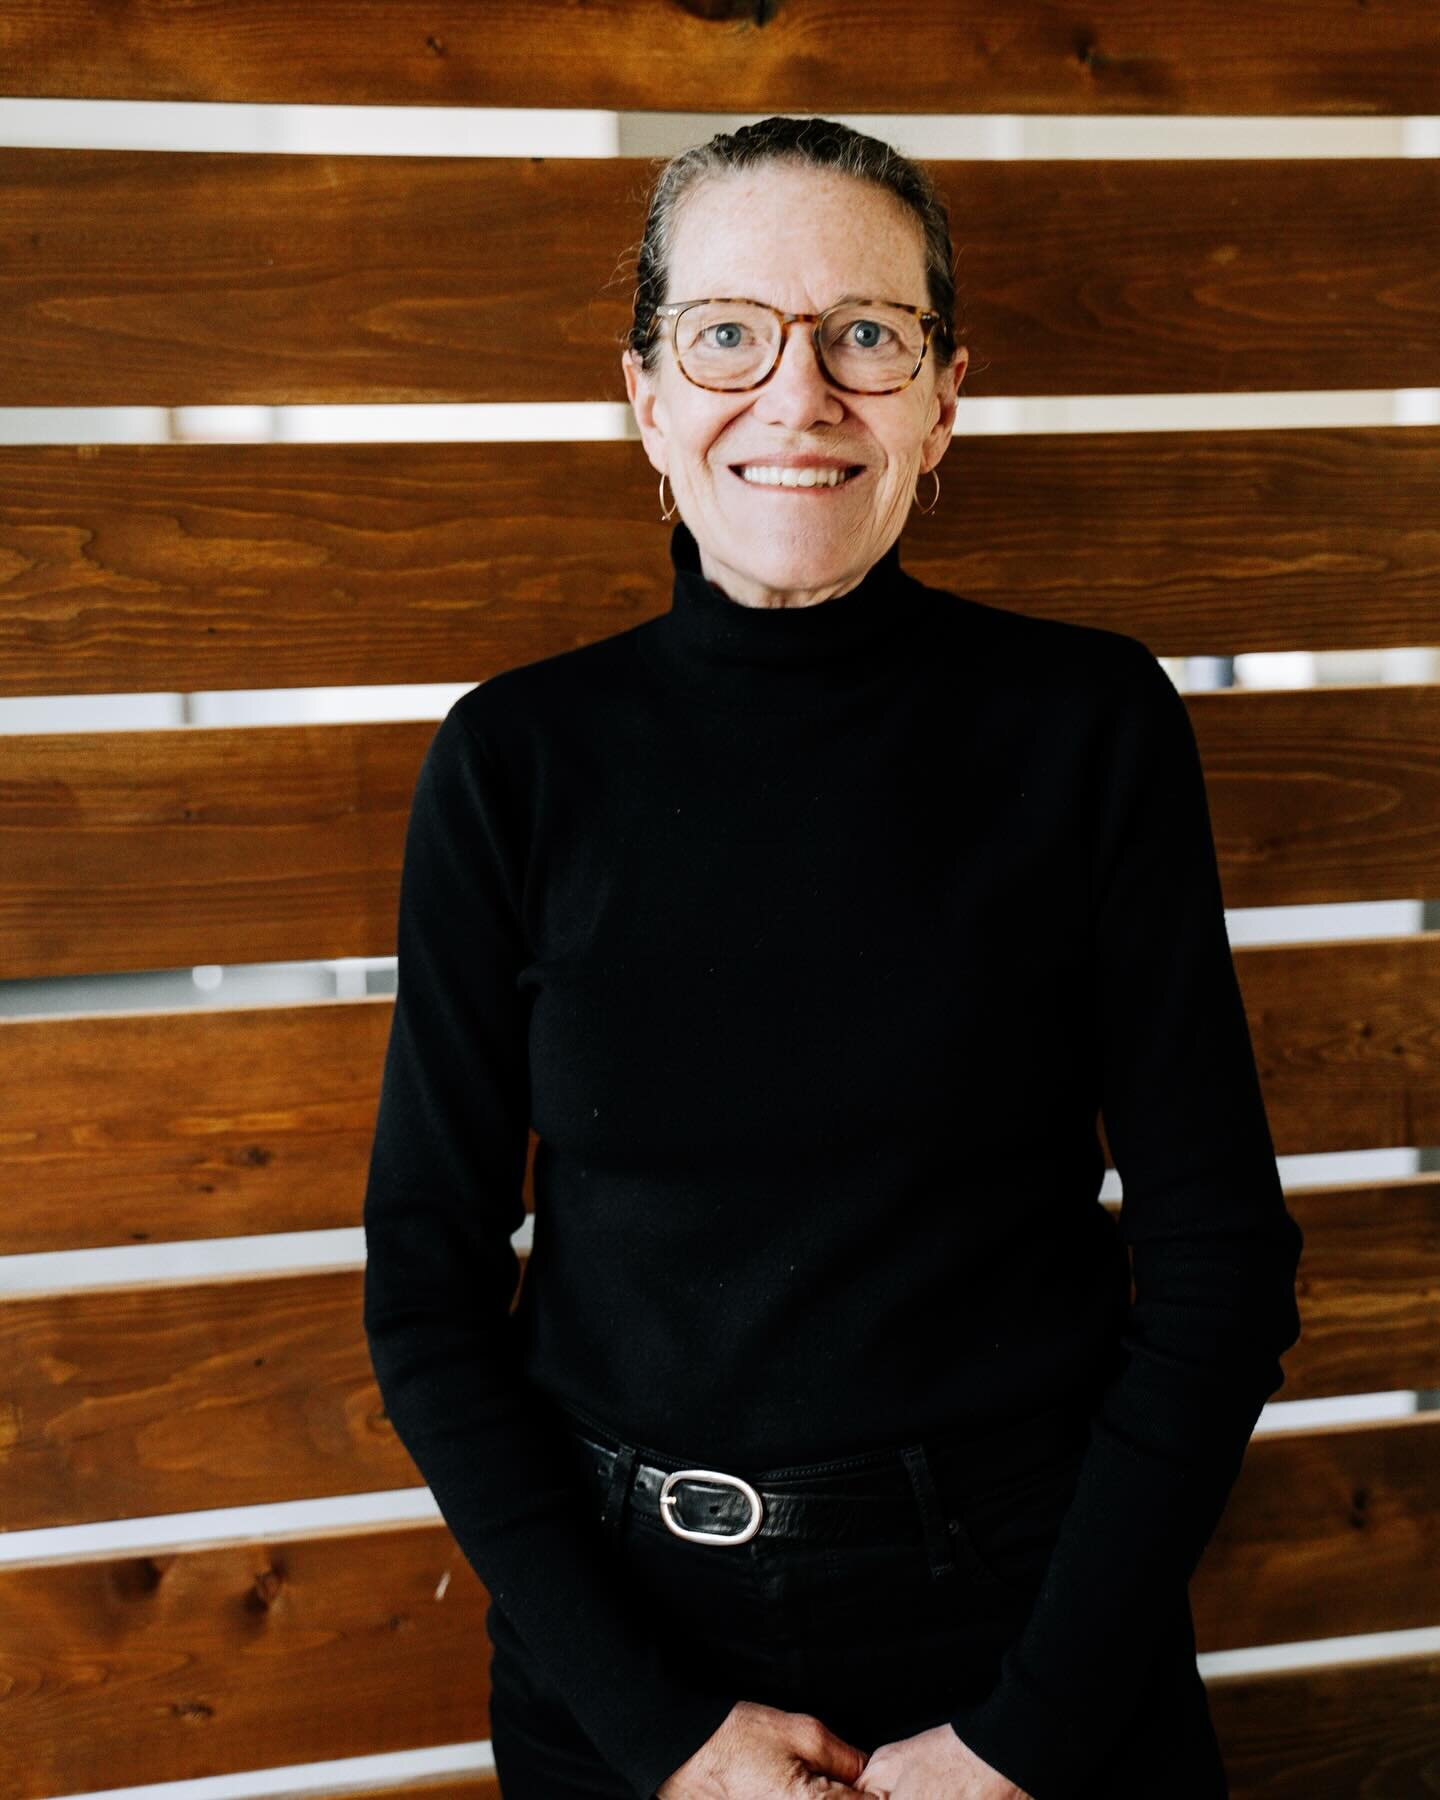 Meet Valerie, the powerhouse behind our events! ✨
With 40 years of invaluable experience in hospitality and catering services, she is not just an event services manager&mdash;she&rsquo;s an innovator and a Swiss Army knife in orchestrating seamless c